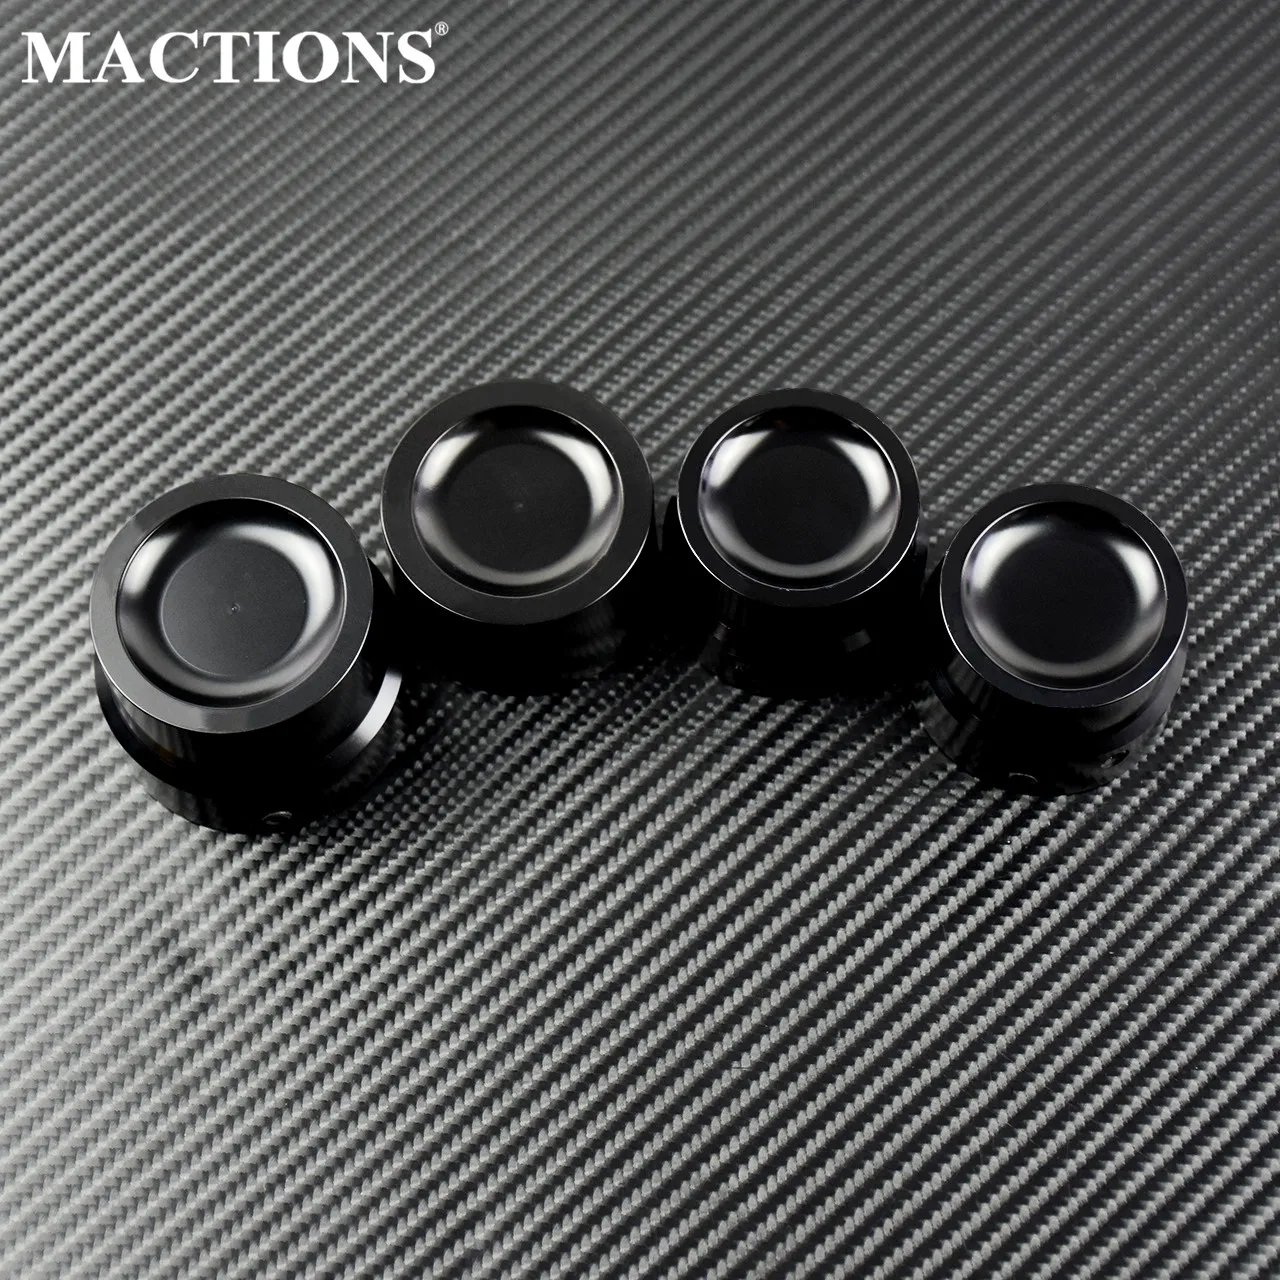 Motorcycle Black Front Rear Axle Nut Covers Cap For Harley Sportster XL 1200 883 Touring Electra Glide Road King Softail Dyna